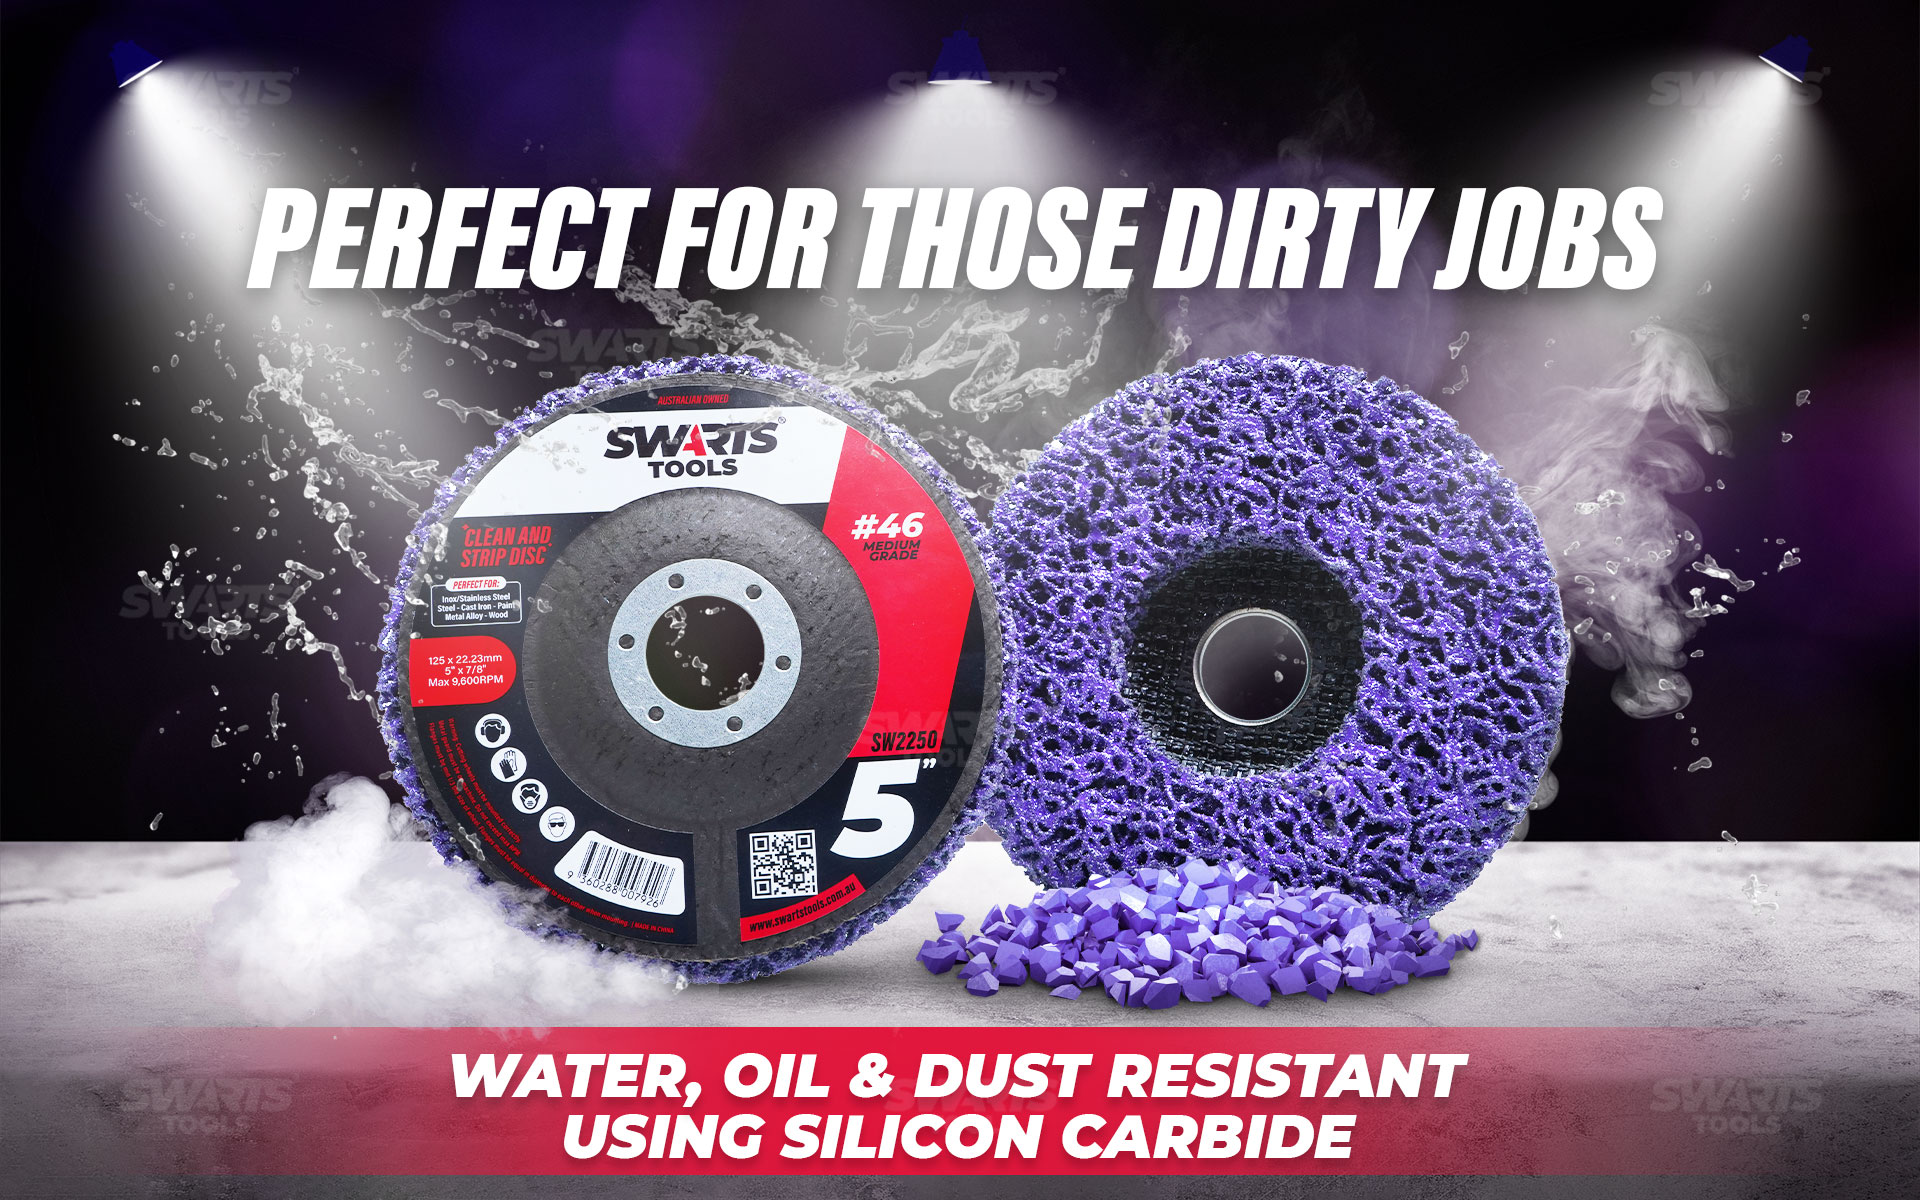 perfect for those dirty jobs, water, oil & dust resistant using silicon carbide